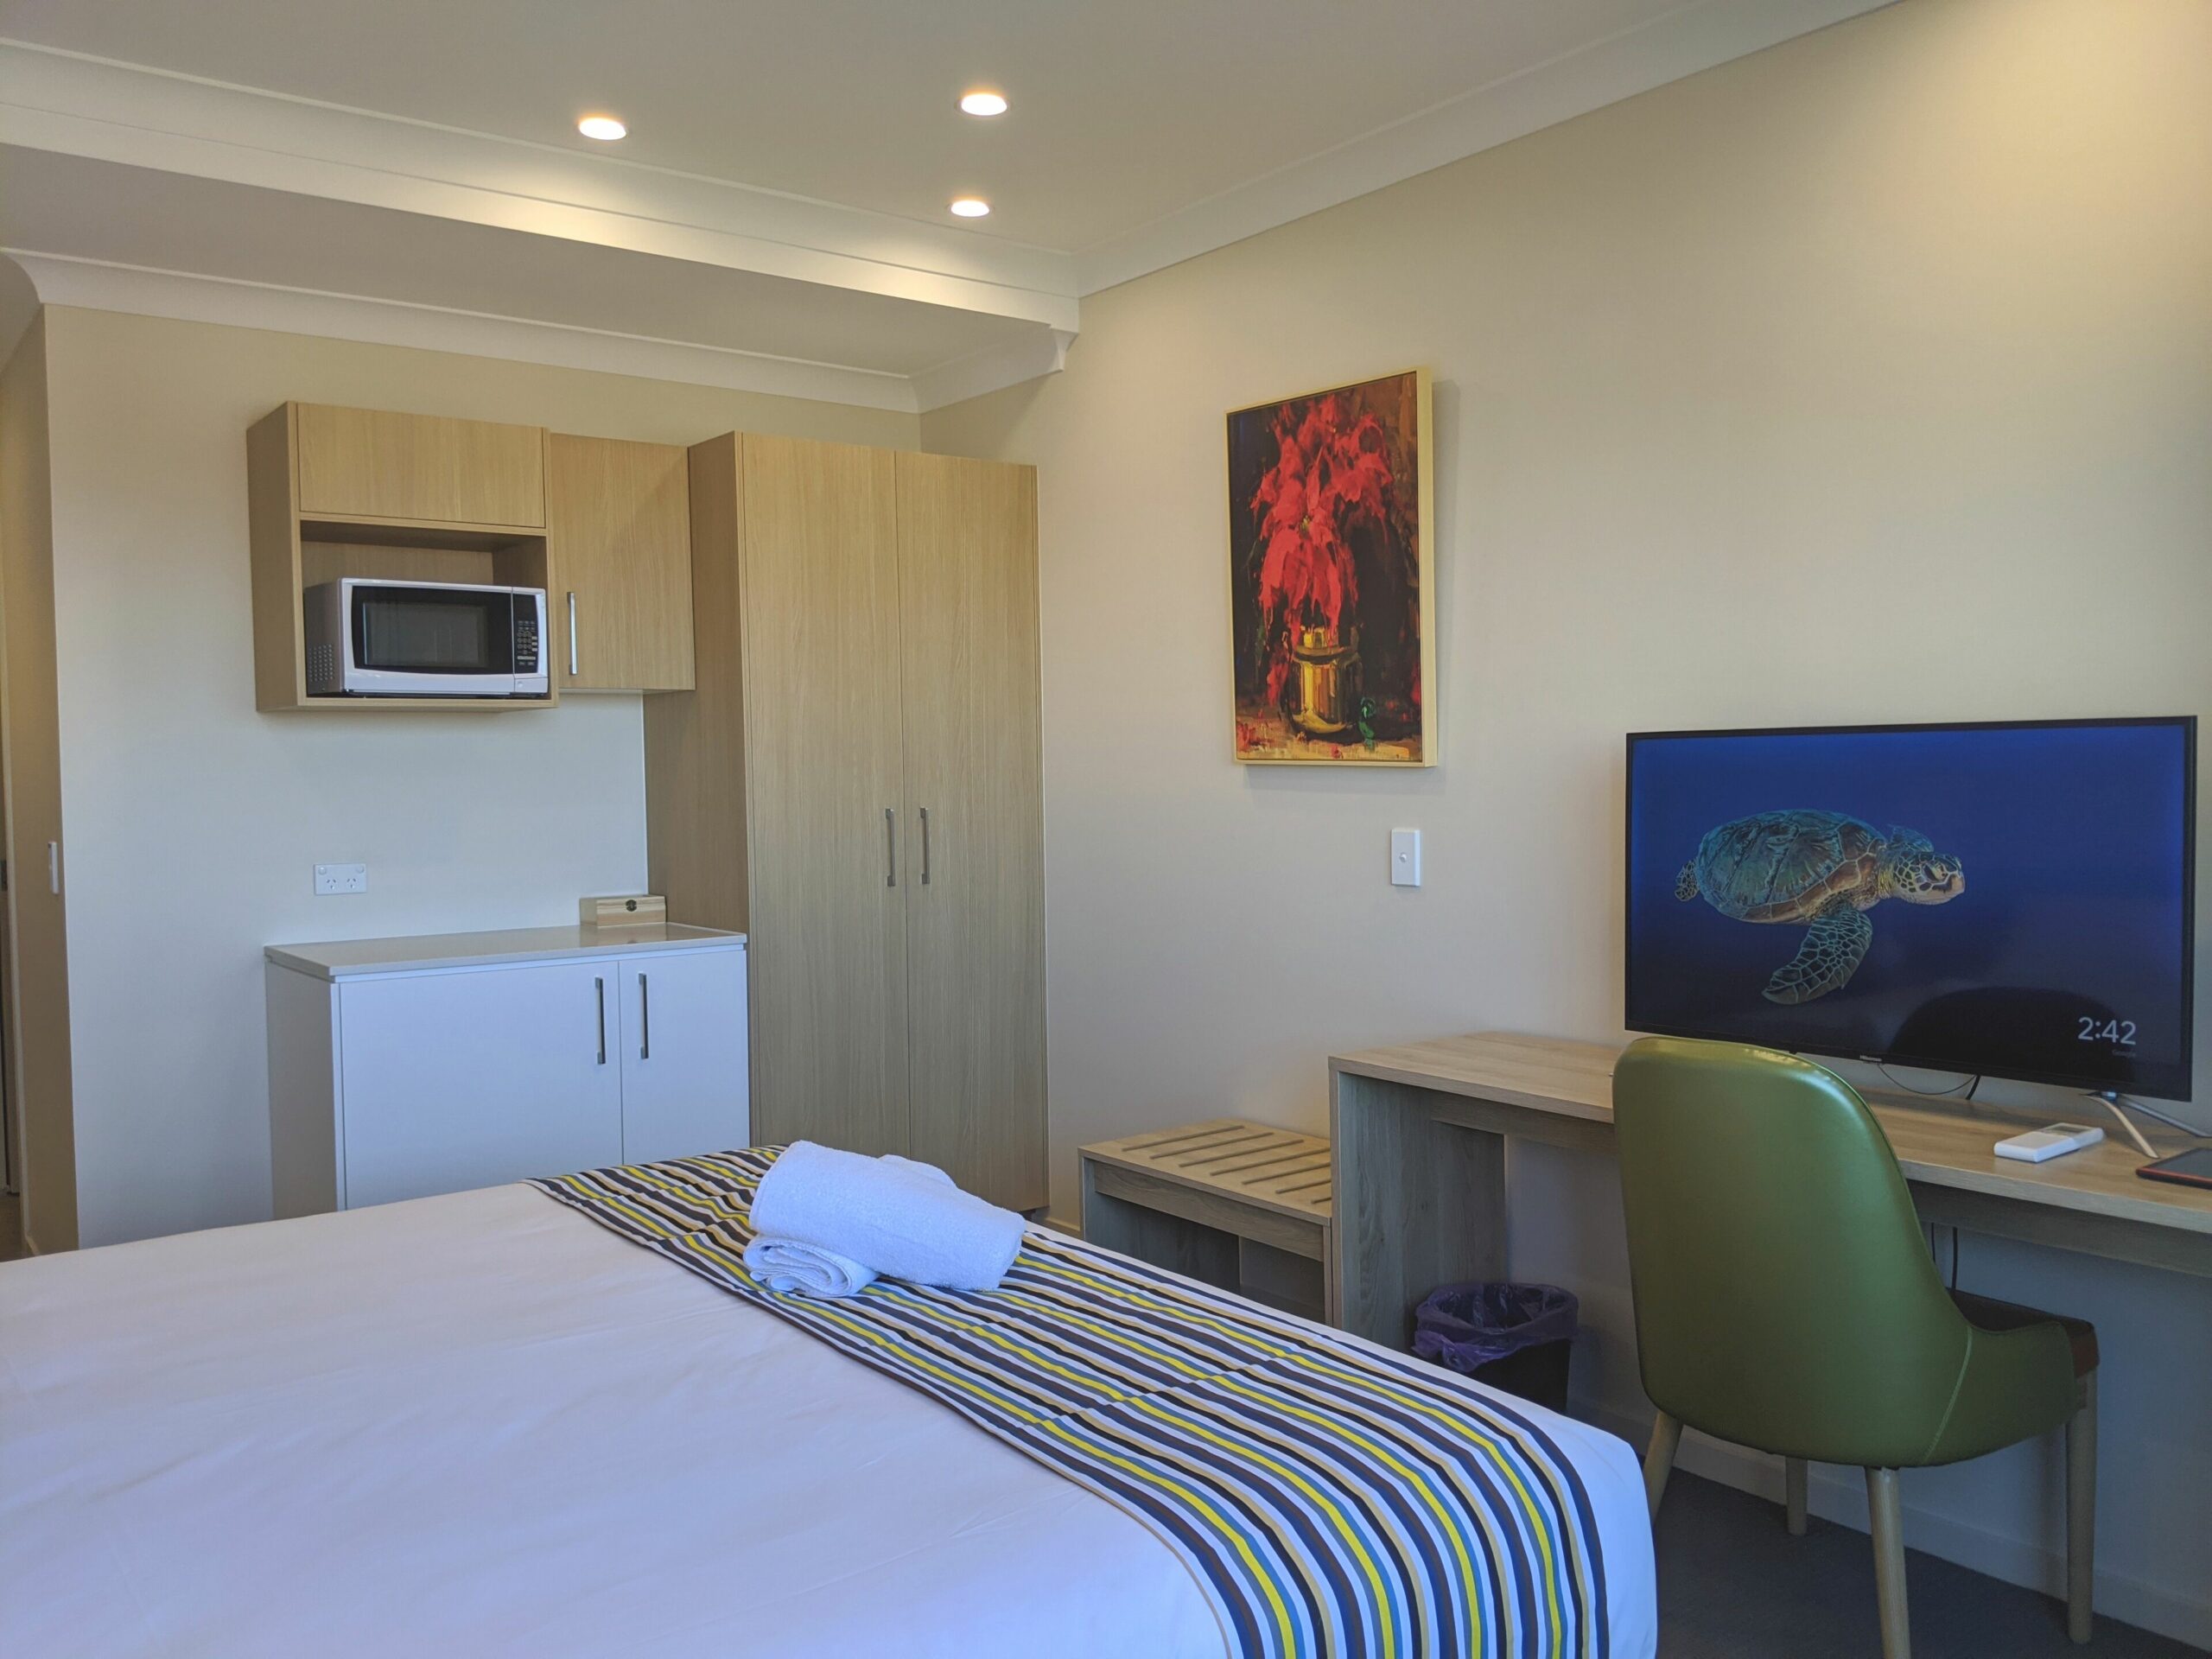 Modern King Room With own Entrance in Brisbane